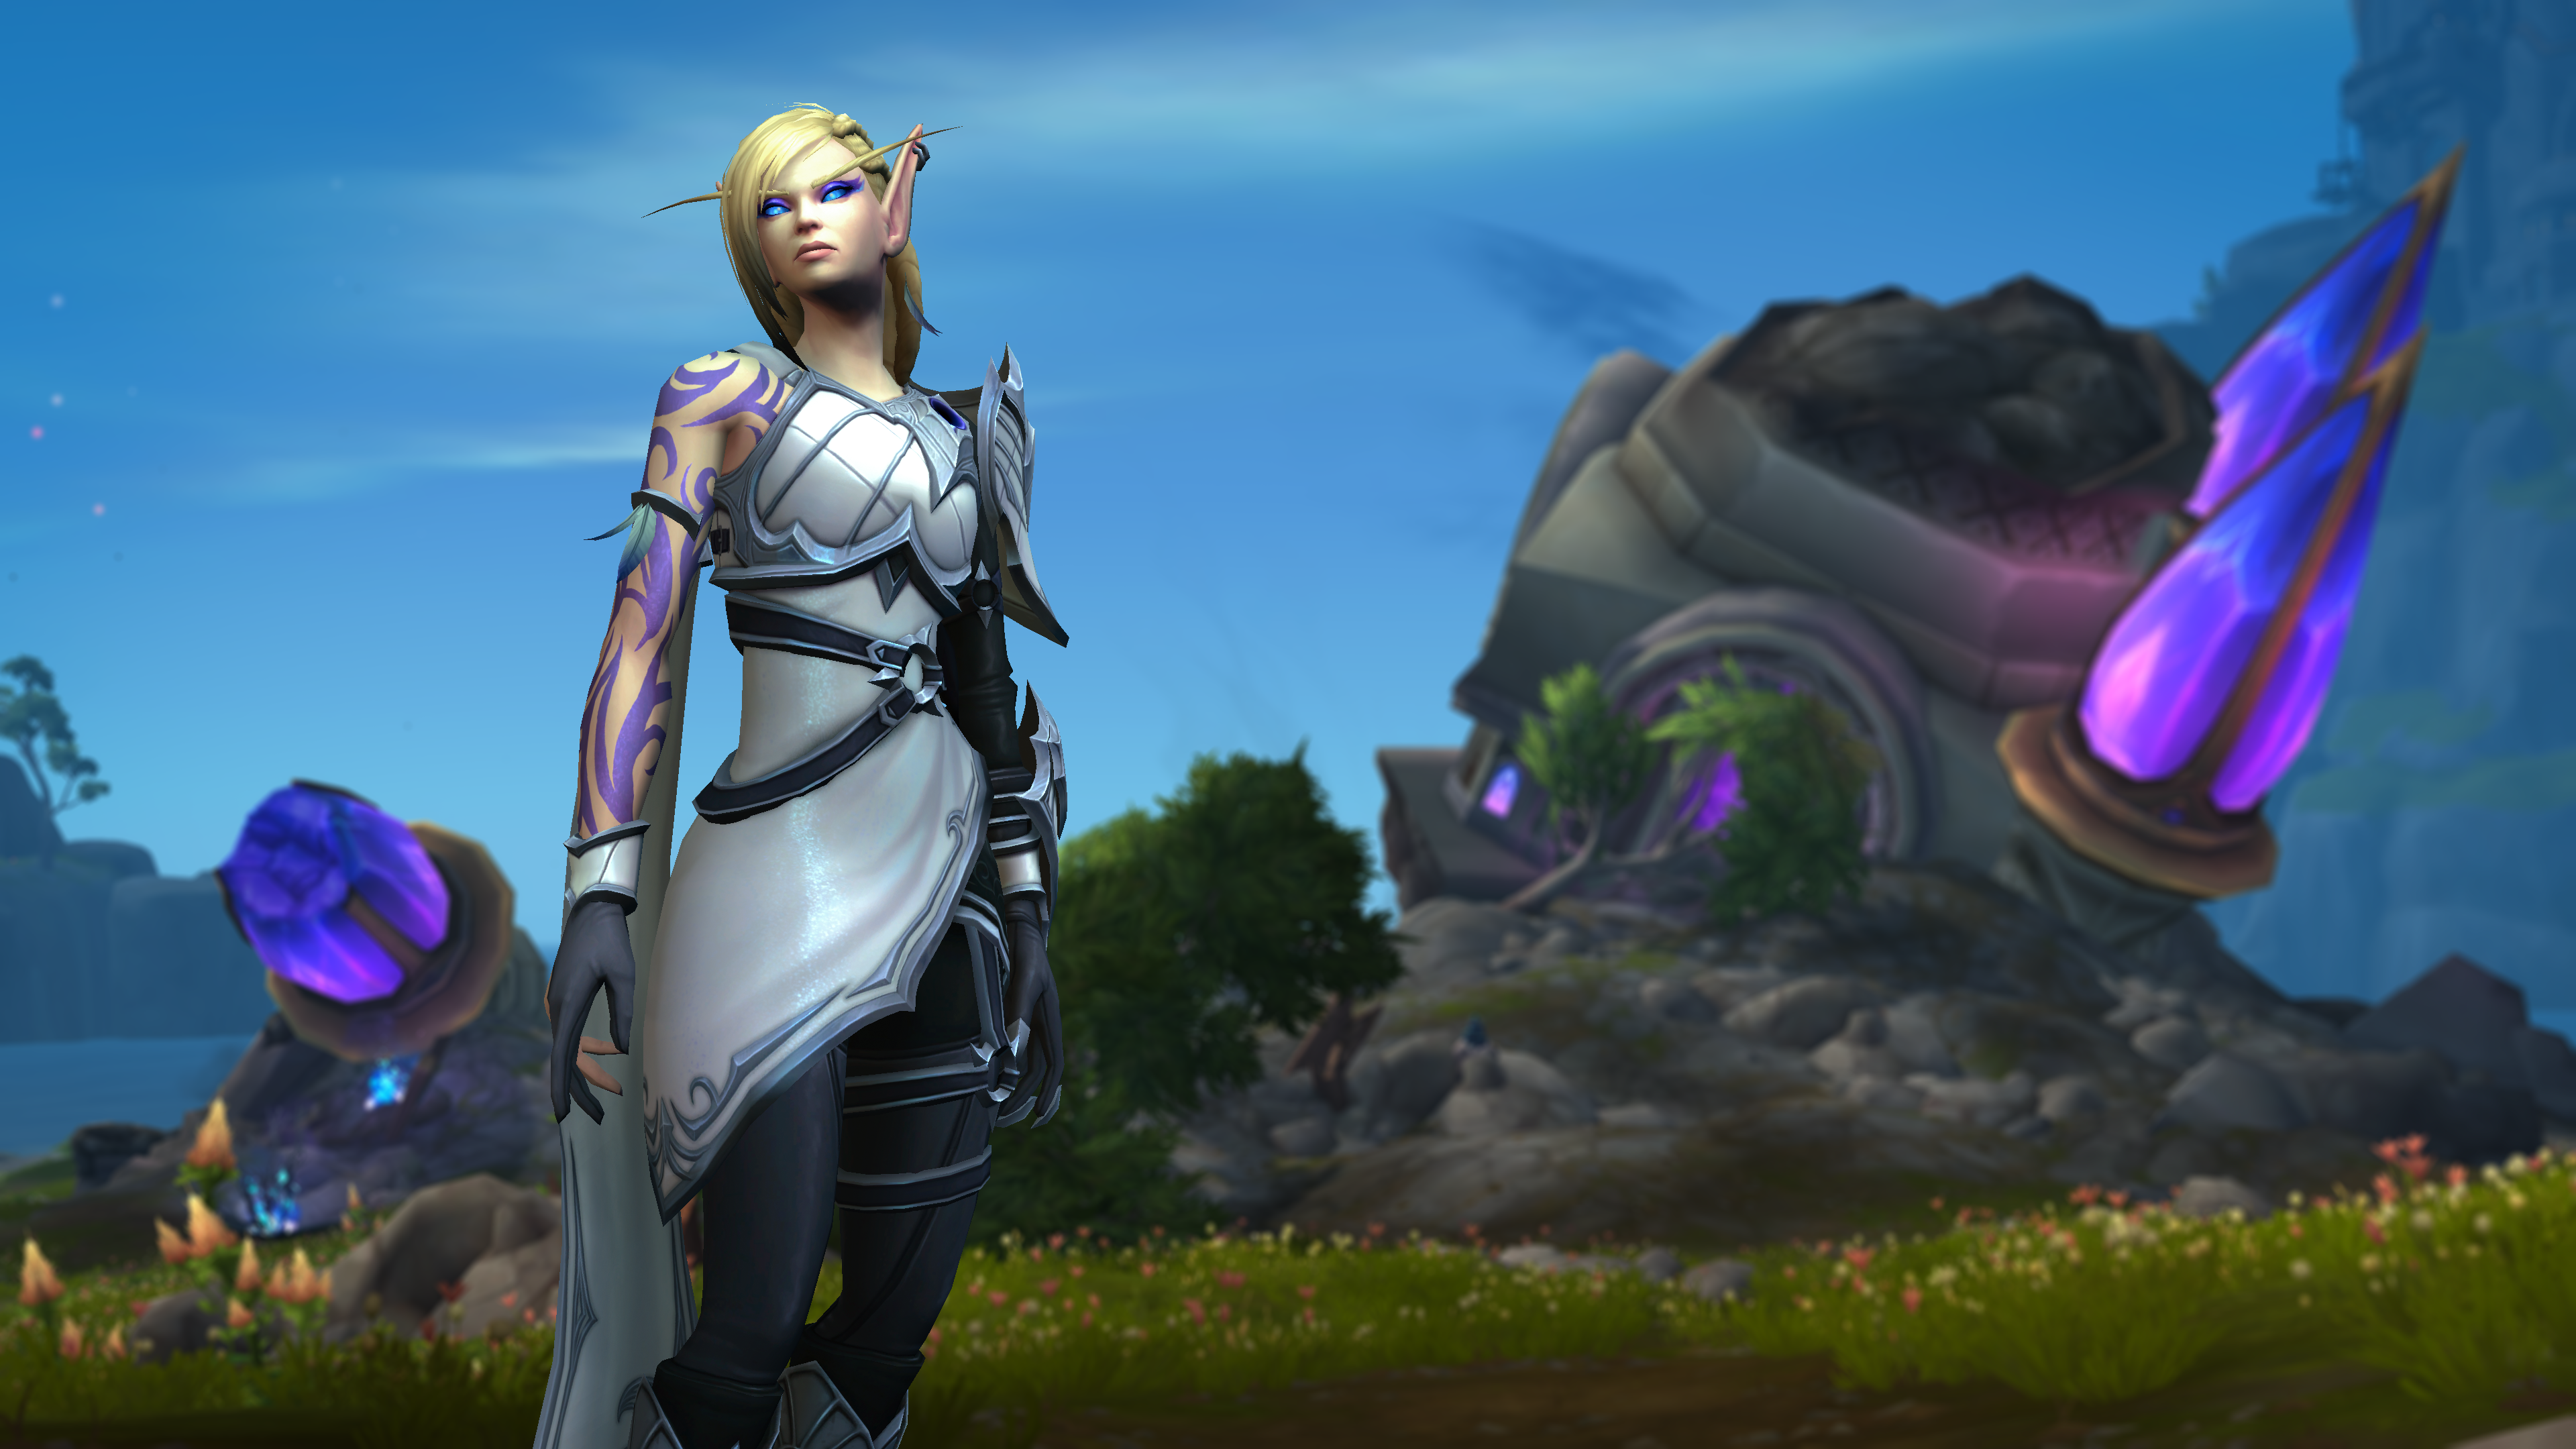 Alleria Windrunner, an elf with short blond hair and a contemplative expression, dressed in white garb with purple tattoos running down one arm, stands in front of a crumbled structure marked with big purple crystals.